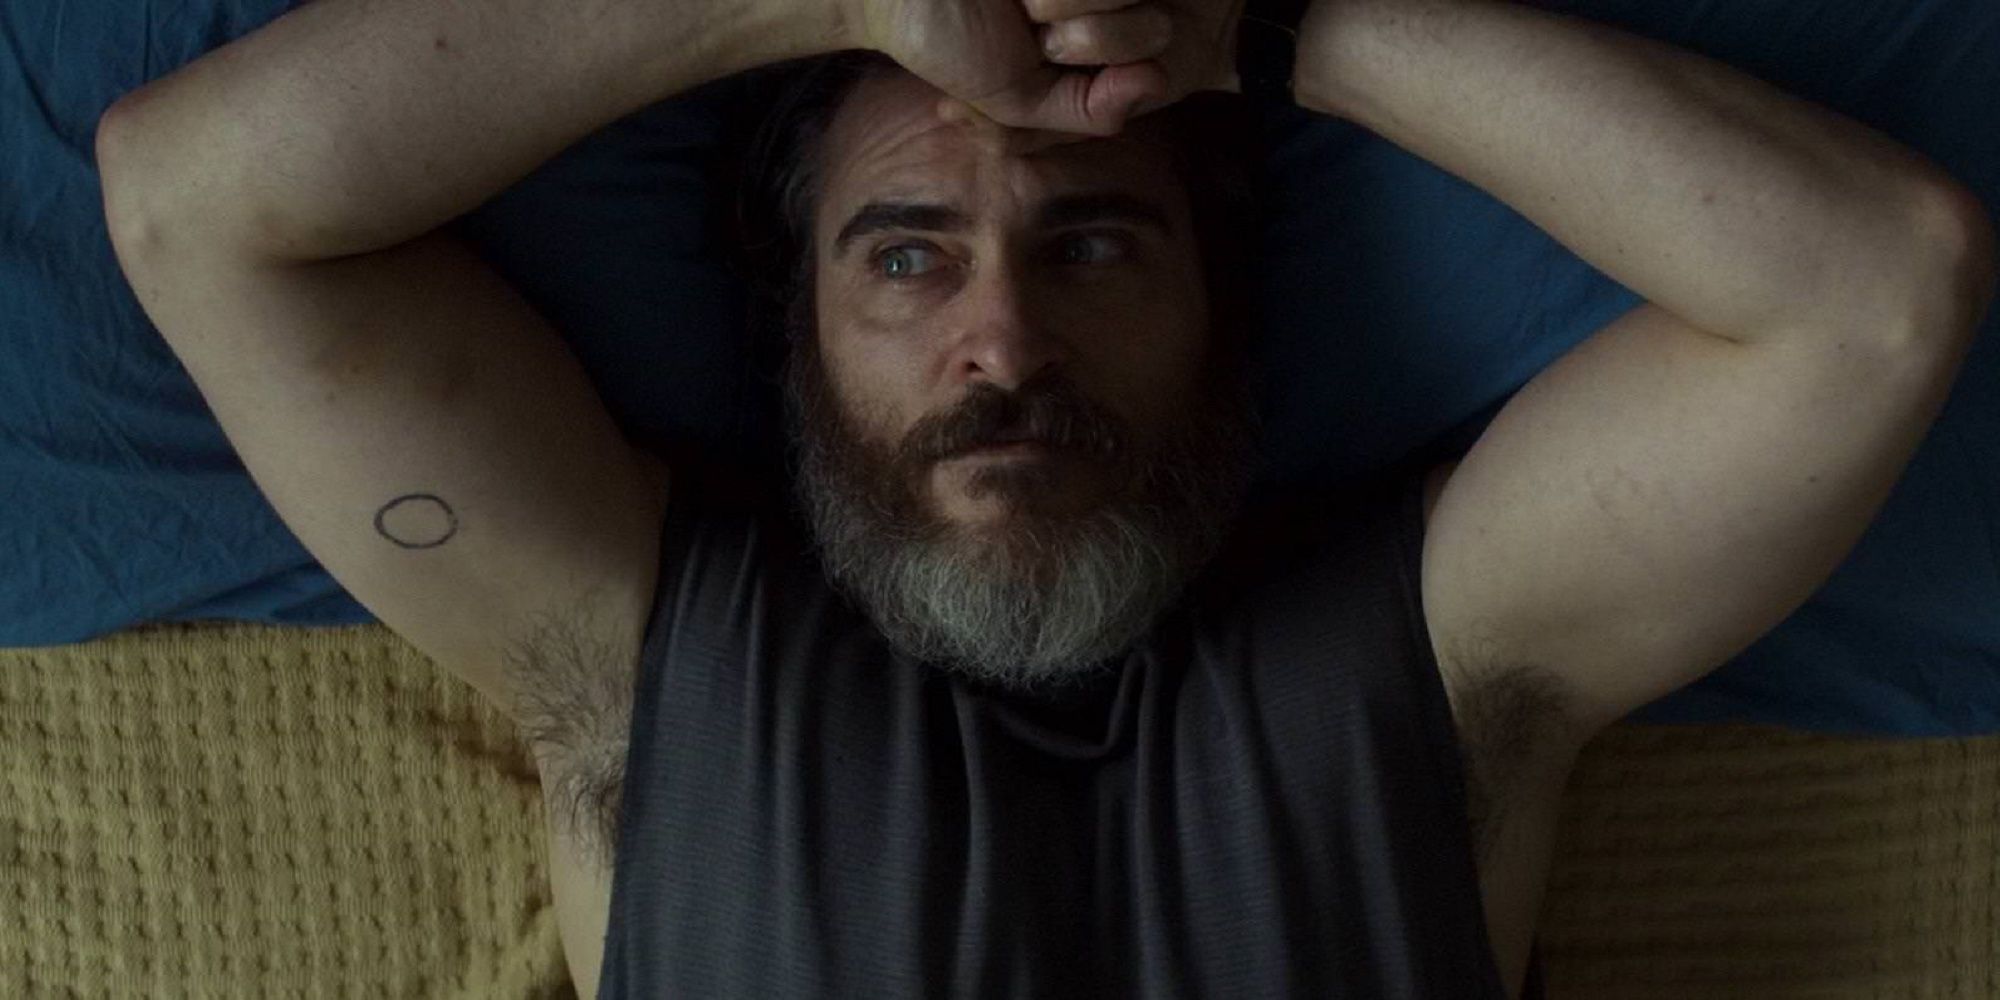 Joe laying in bed in You Were Never Really Here.